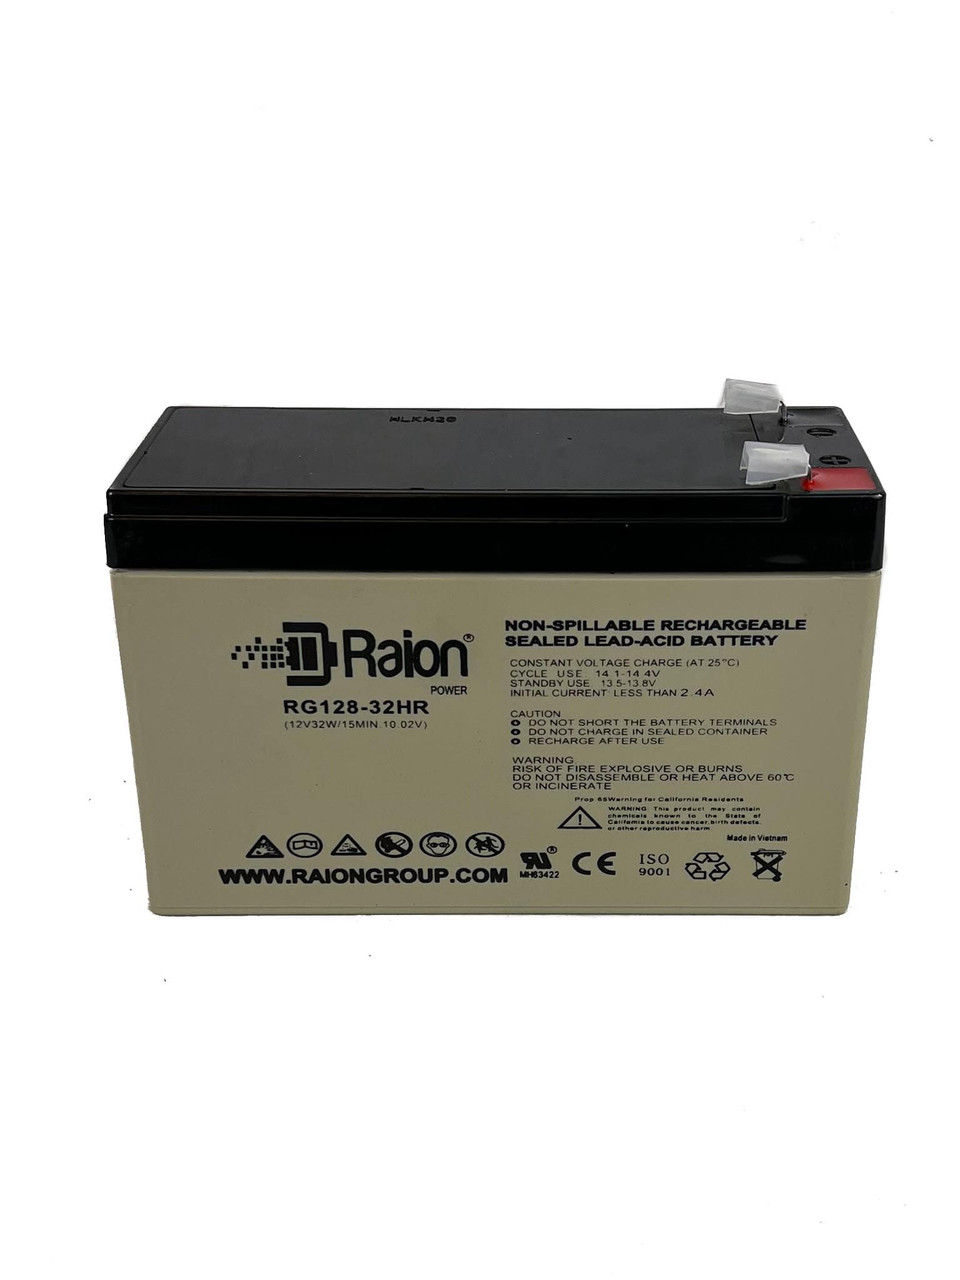 Raion Power RG128-32HR Replacement High Rate Battery Cartridge for Tripp Lite BCPRO600